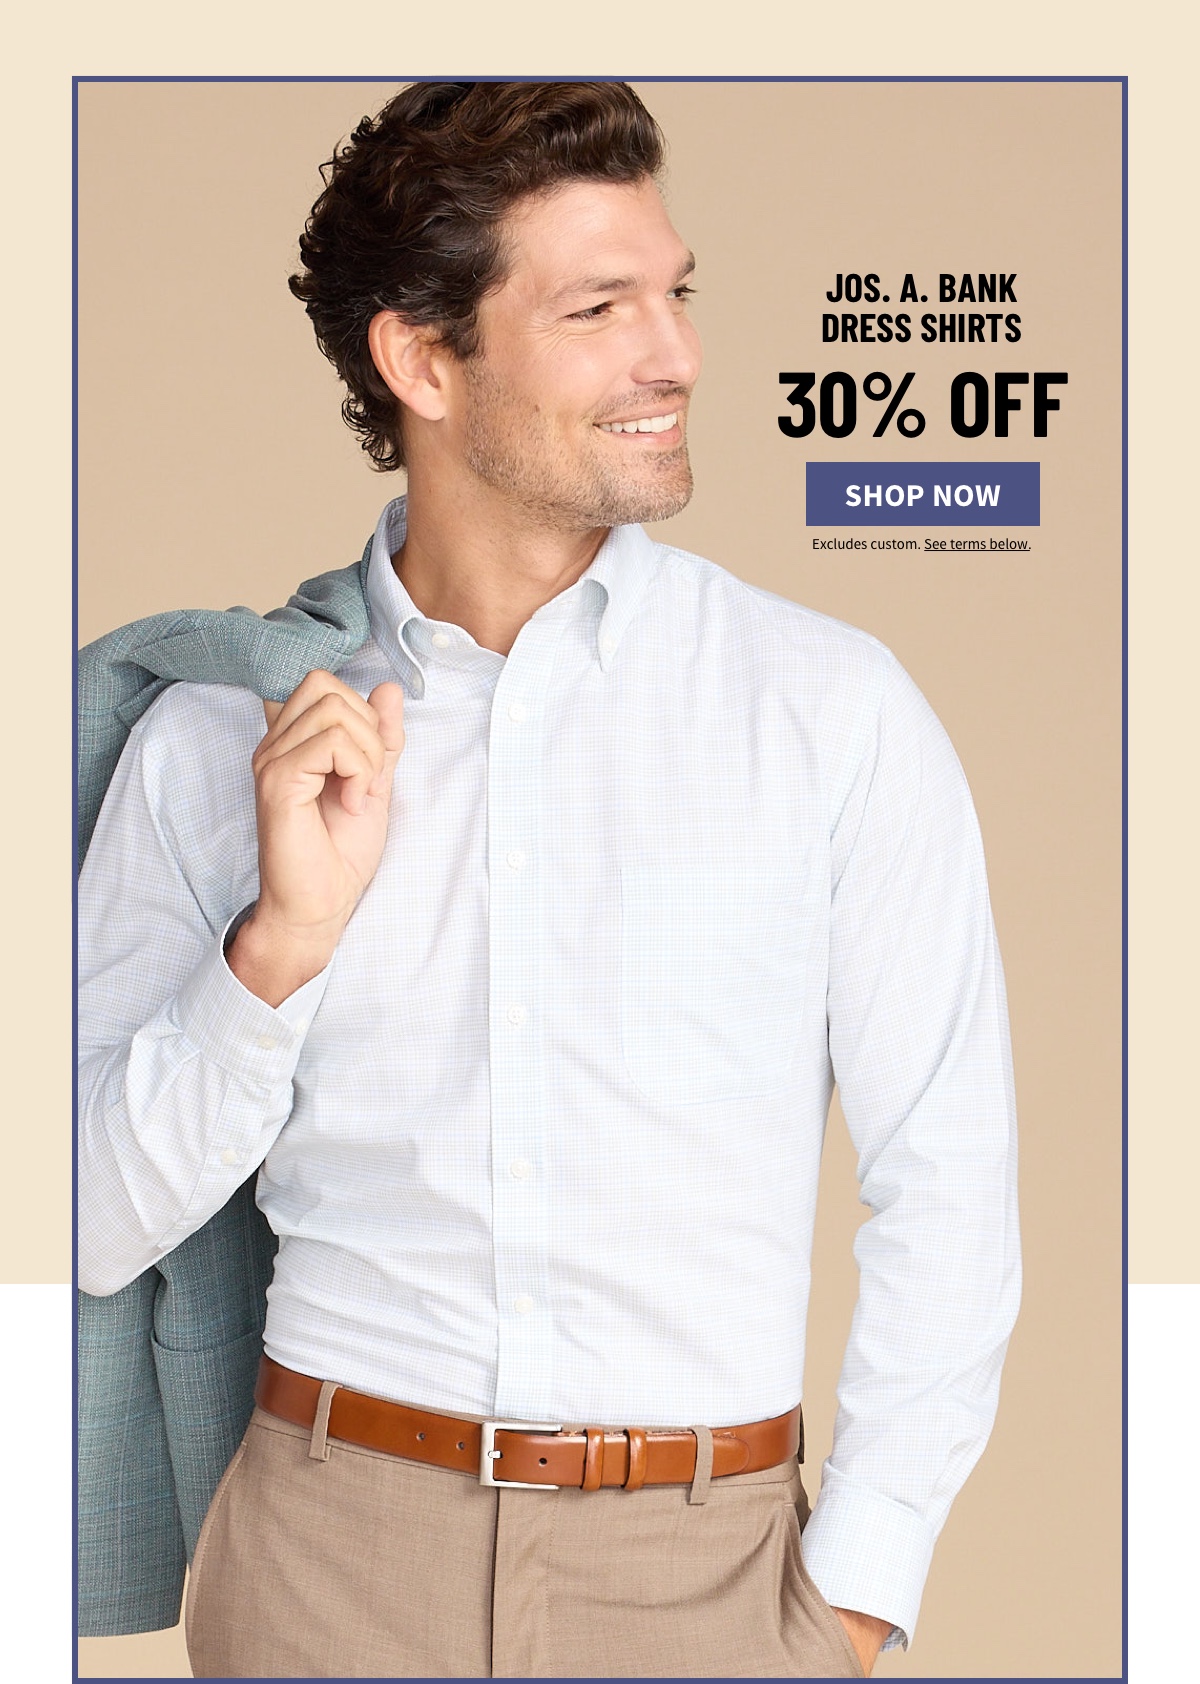 Jos. A. Bank Dress Shirts 30% off Shop Now Excludes custom. See terms below.